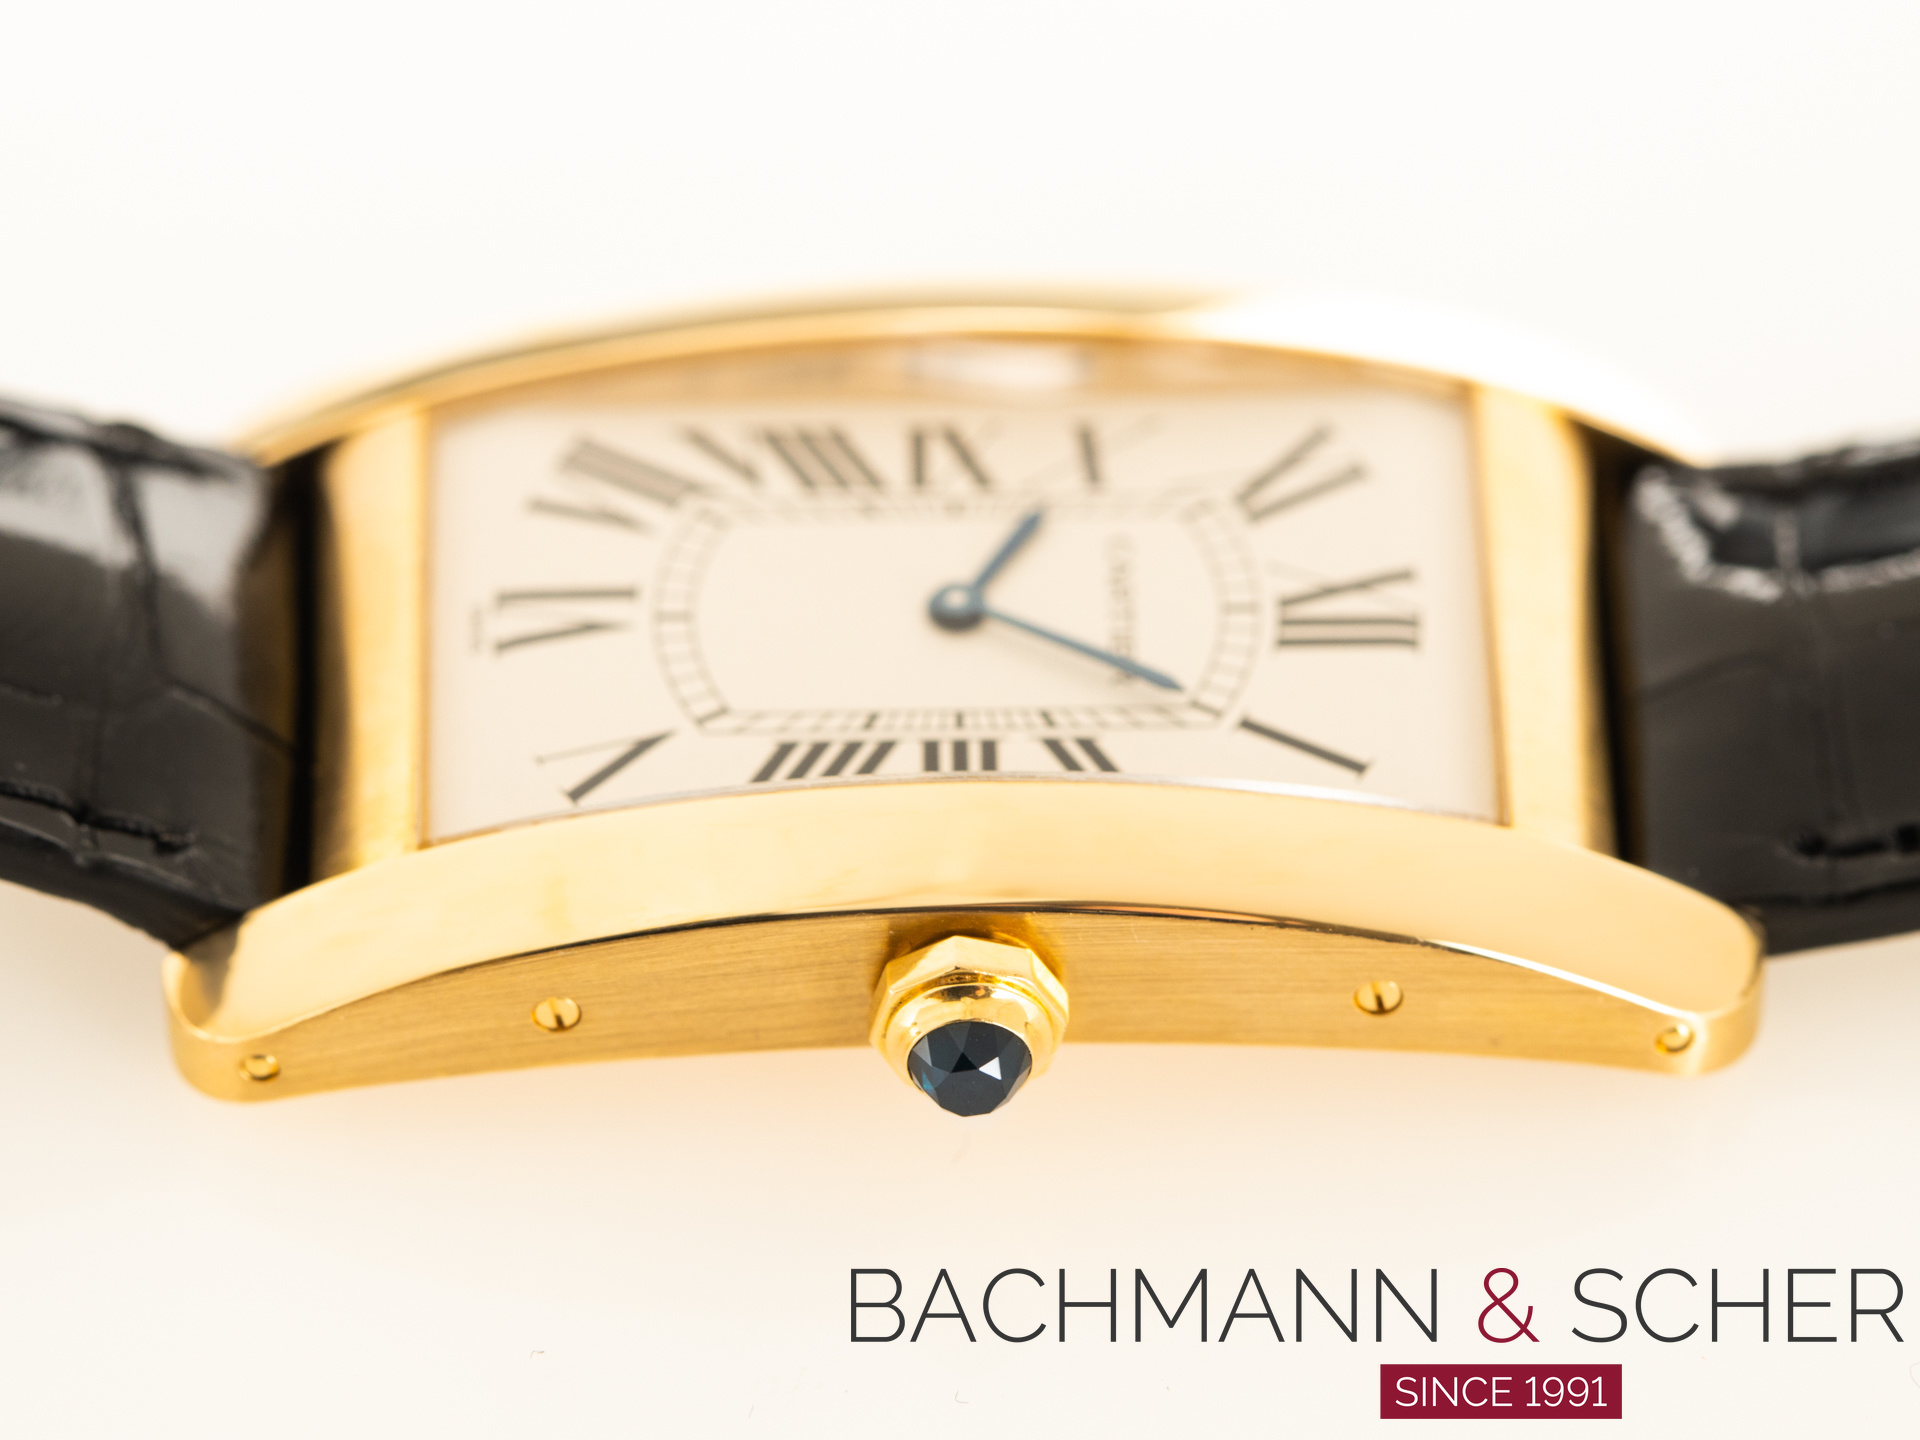 SOLD*Cartier Tank Americaine ref# 1735